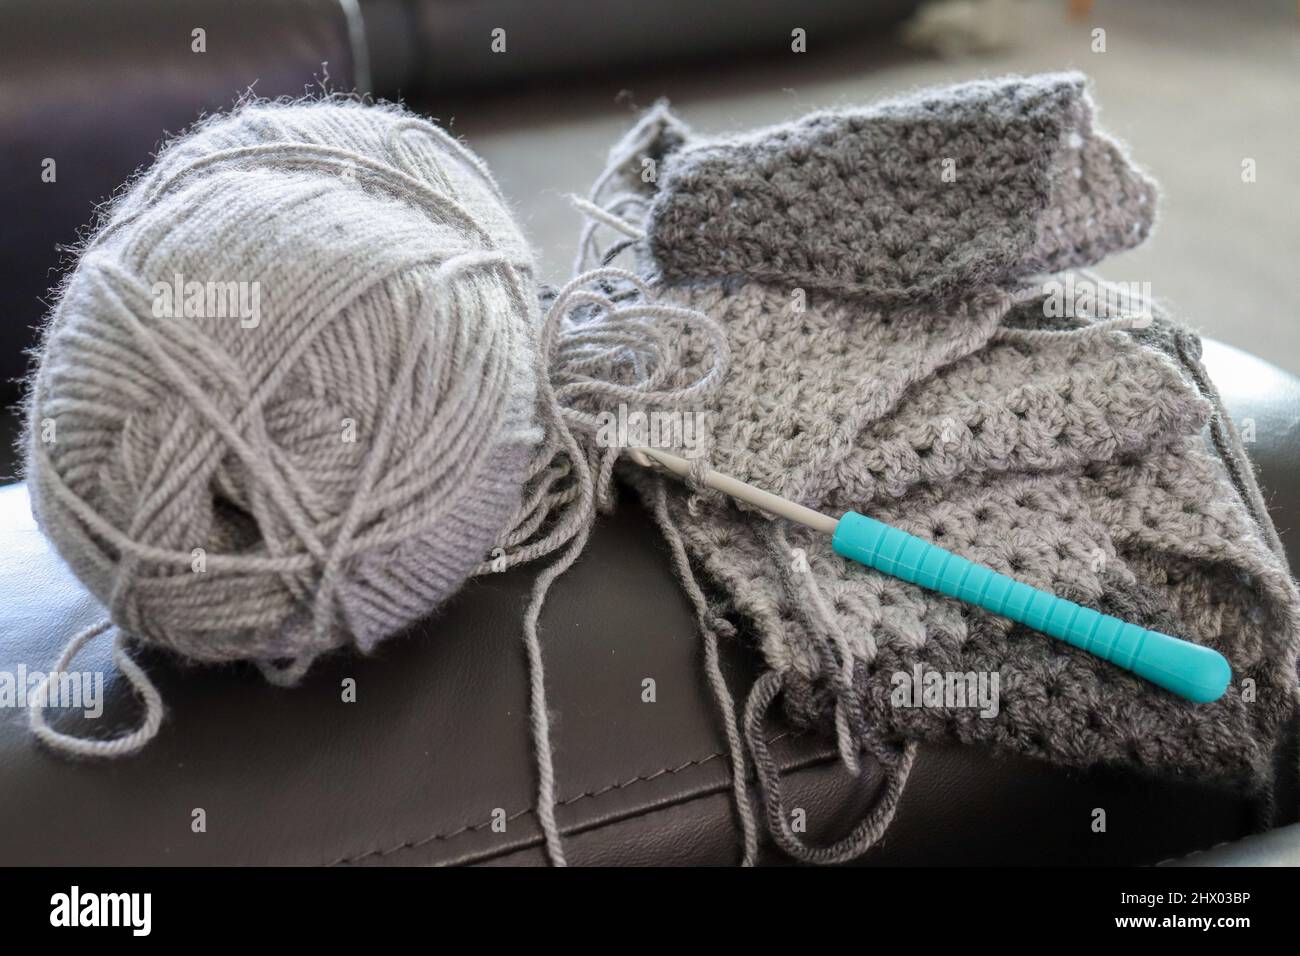 Ball of grey wool and crocheted garment with crochet hook Stock Photo